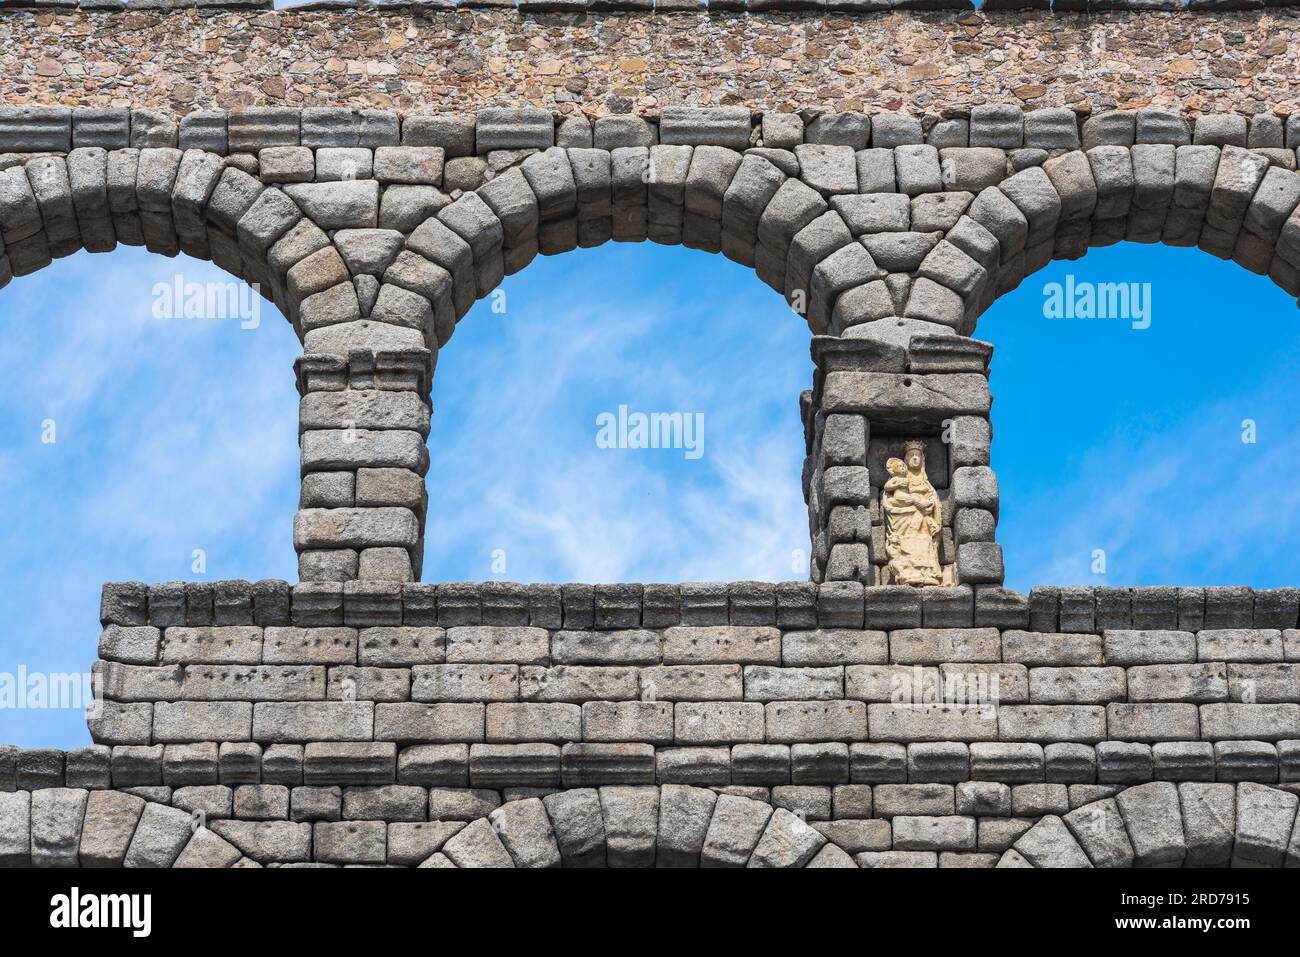 Spain Roman aqueduct, detail of the upper tier stonework of the Roman aqueduct in Segovia showing a statue of the Virgin Mary sited in a niche, Spain Stock Photo